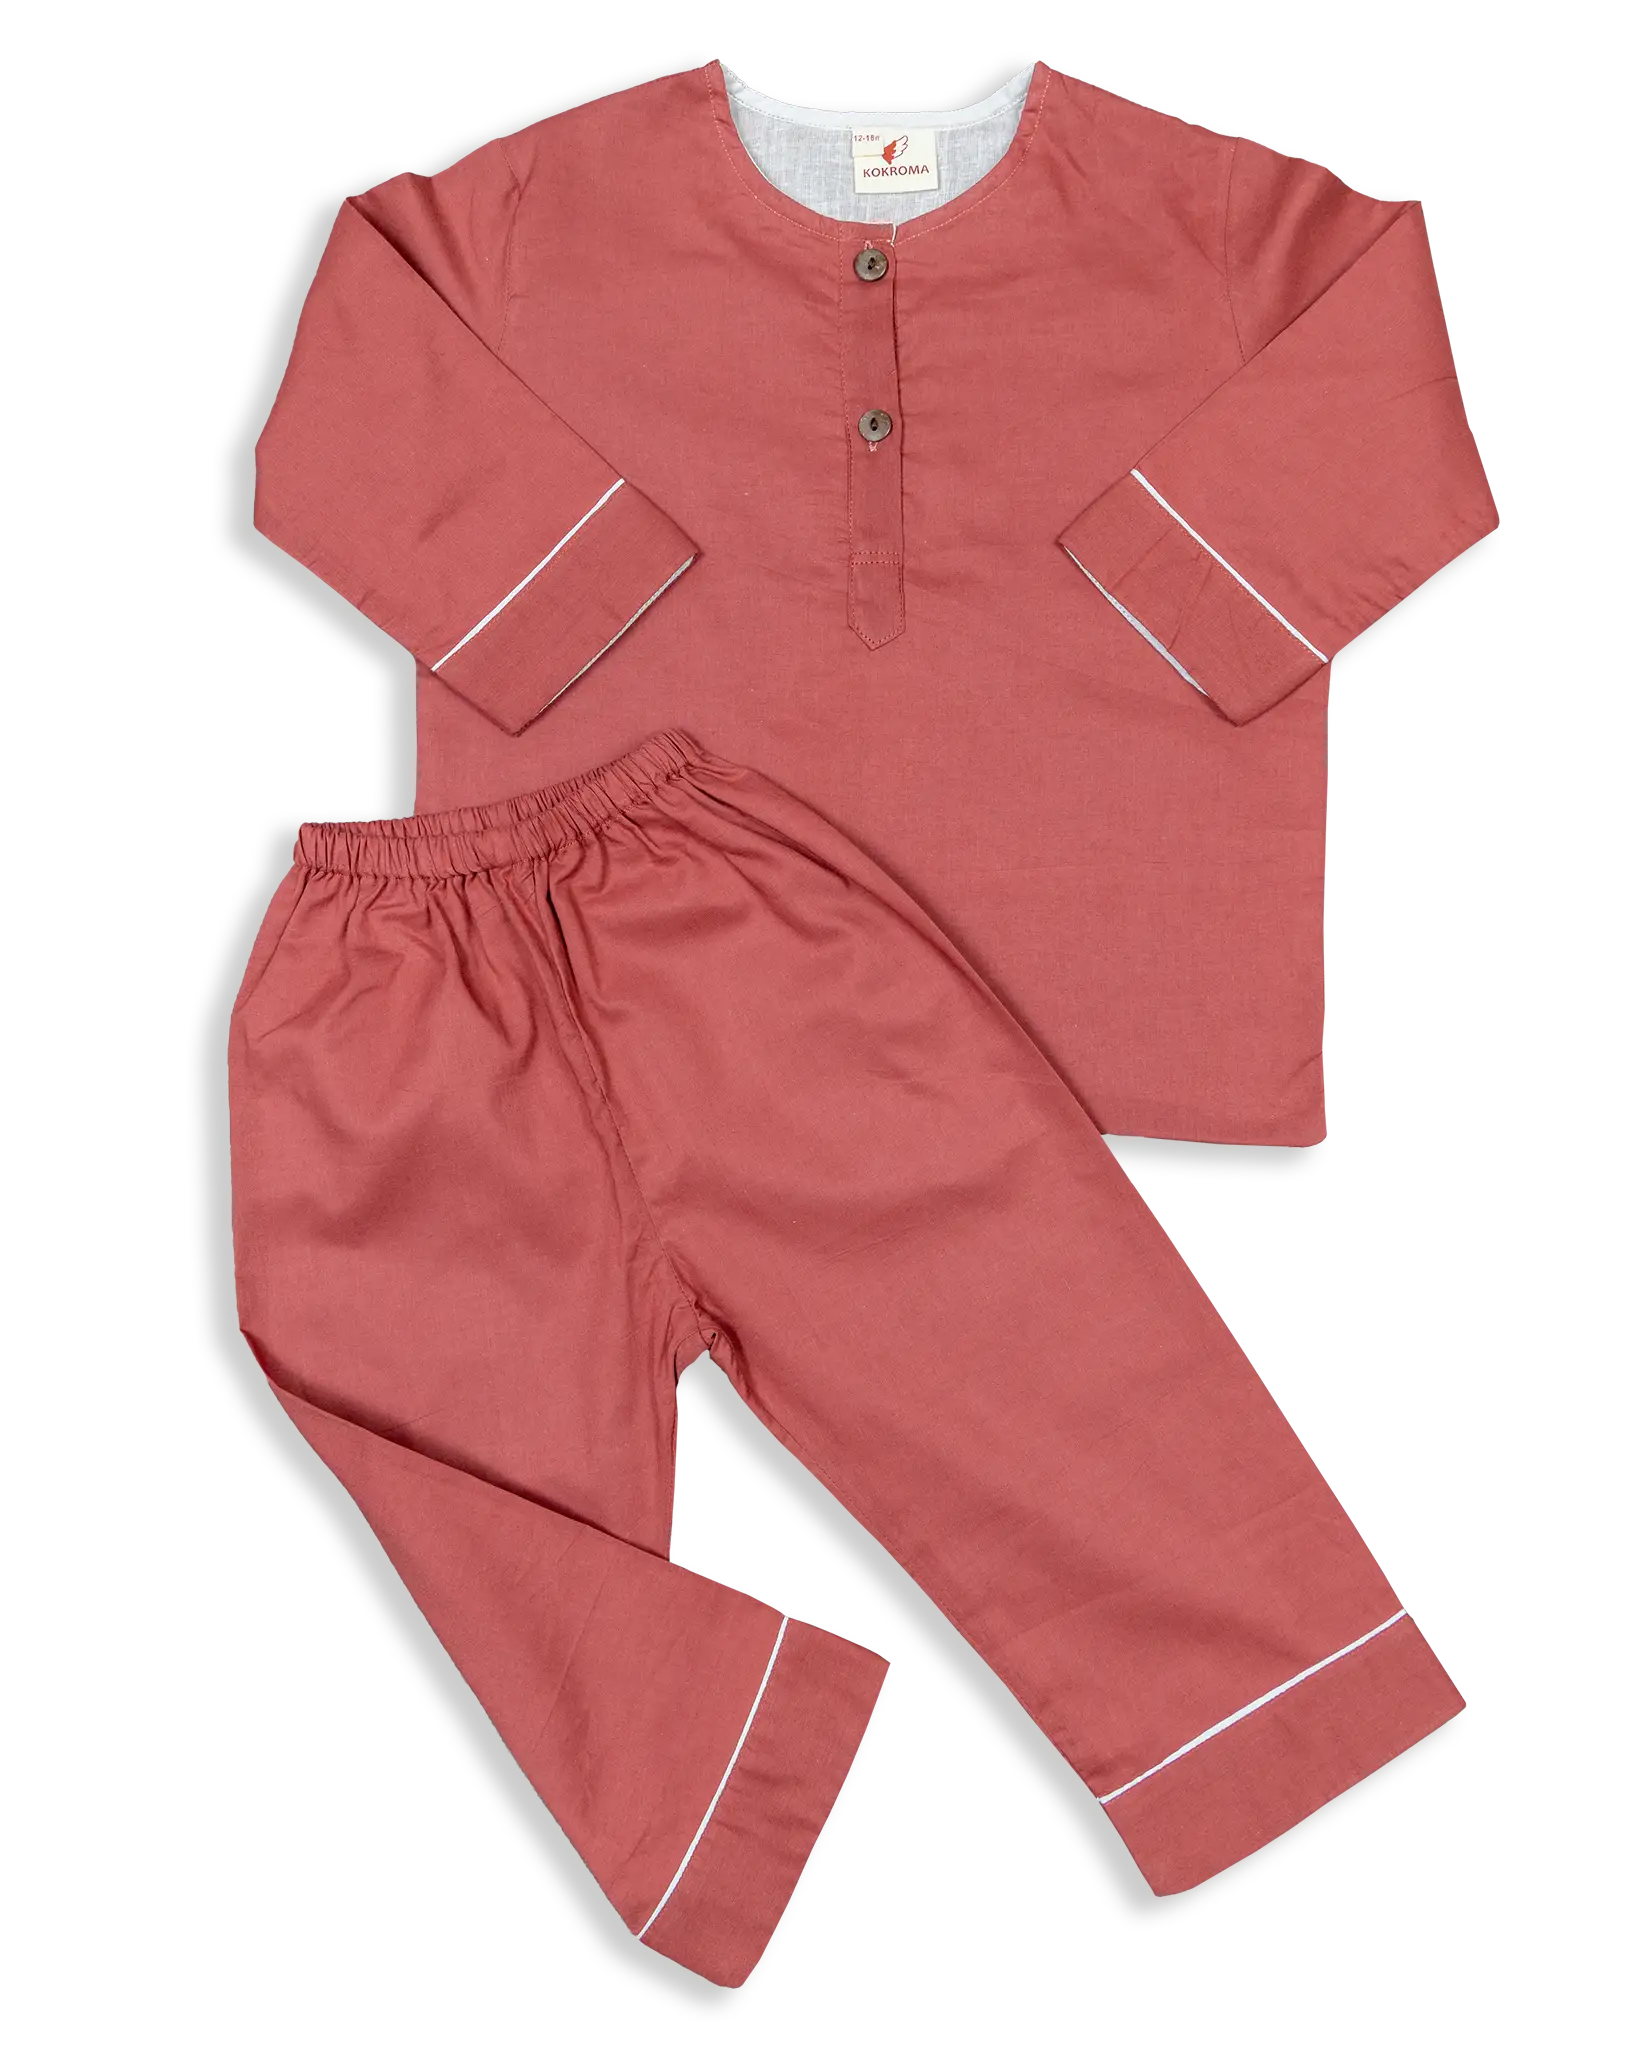 Make your little one feel comfortable, look great, and sleep soundly with Plain Pyjamas. Made with 100% cotton, beautiful colour option and super soft pyjama. Get ready for a luxurious night's sleep in our range of fashionable and cozy pyjama's that are made to last. With our broad spectrum of colours, you'll be sure to find the perfect fit for your baby. Upgrade your baby night-time routine with Plain Panamas' superior quality!